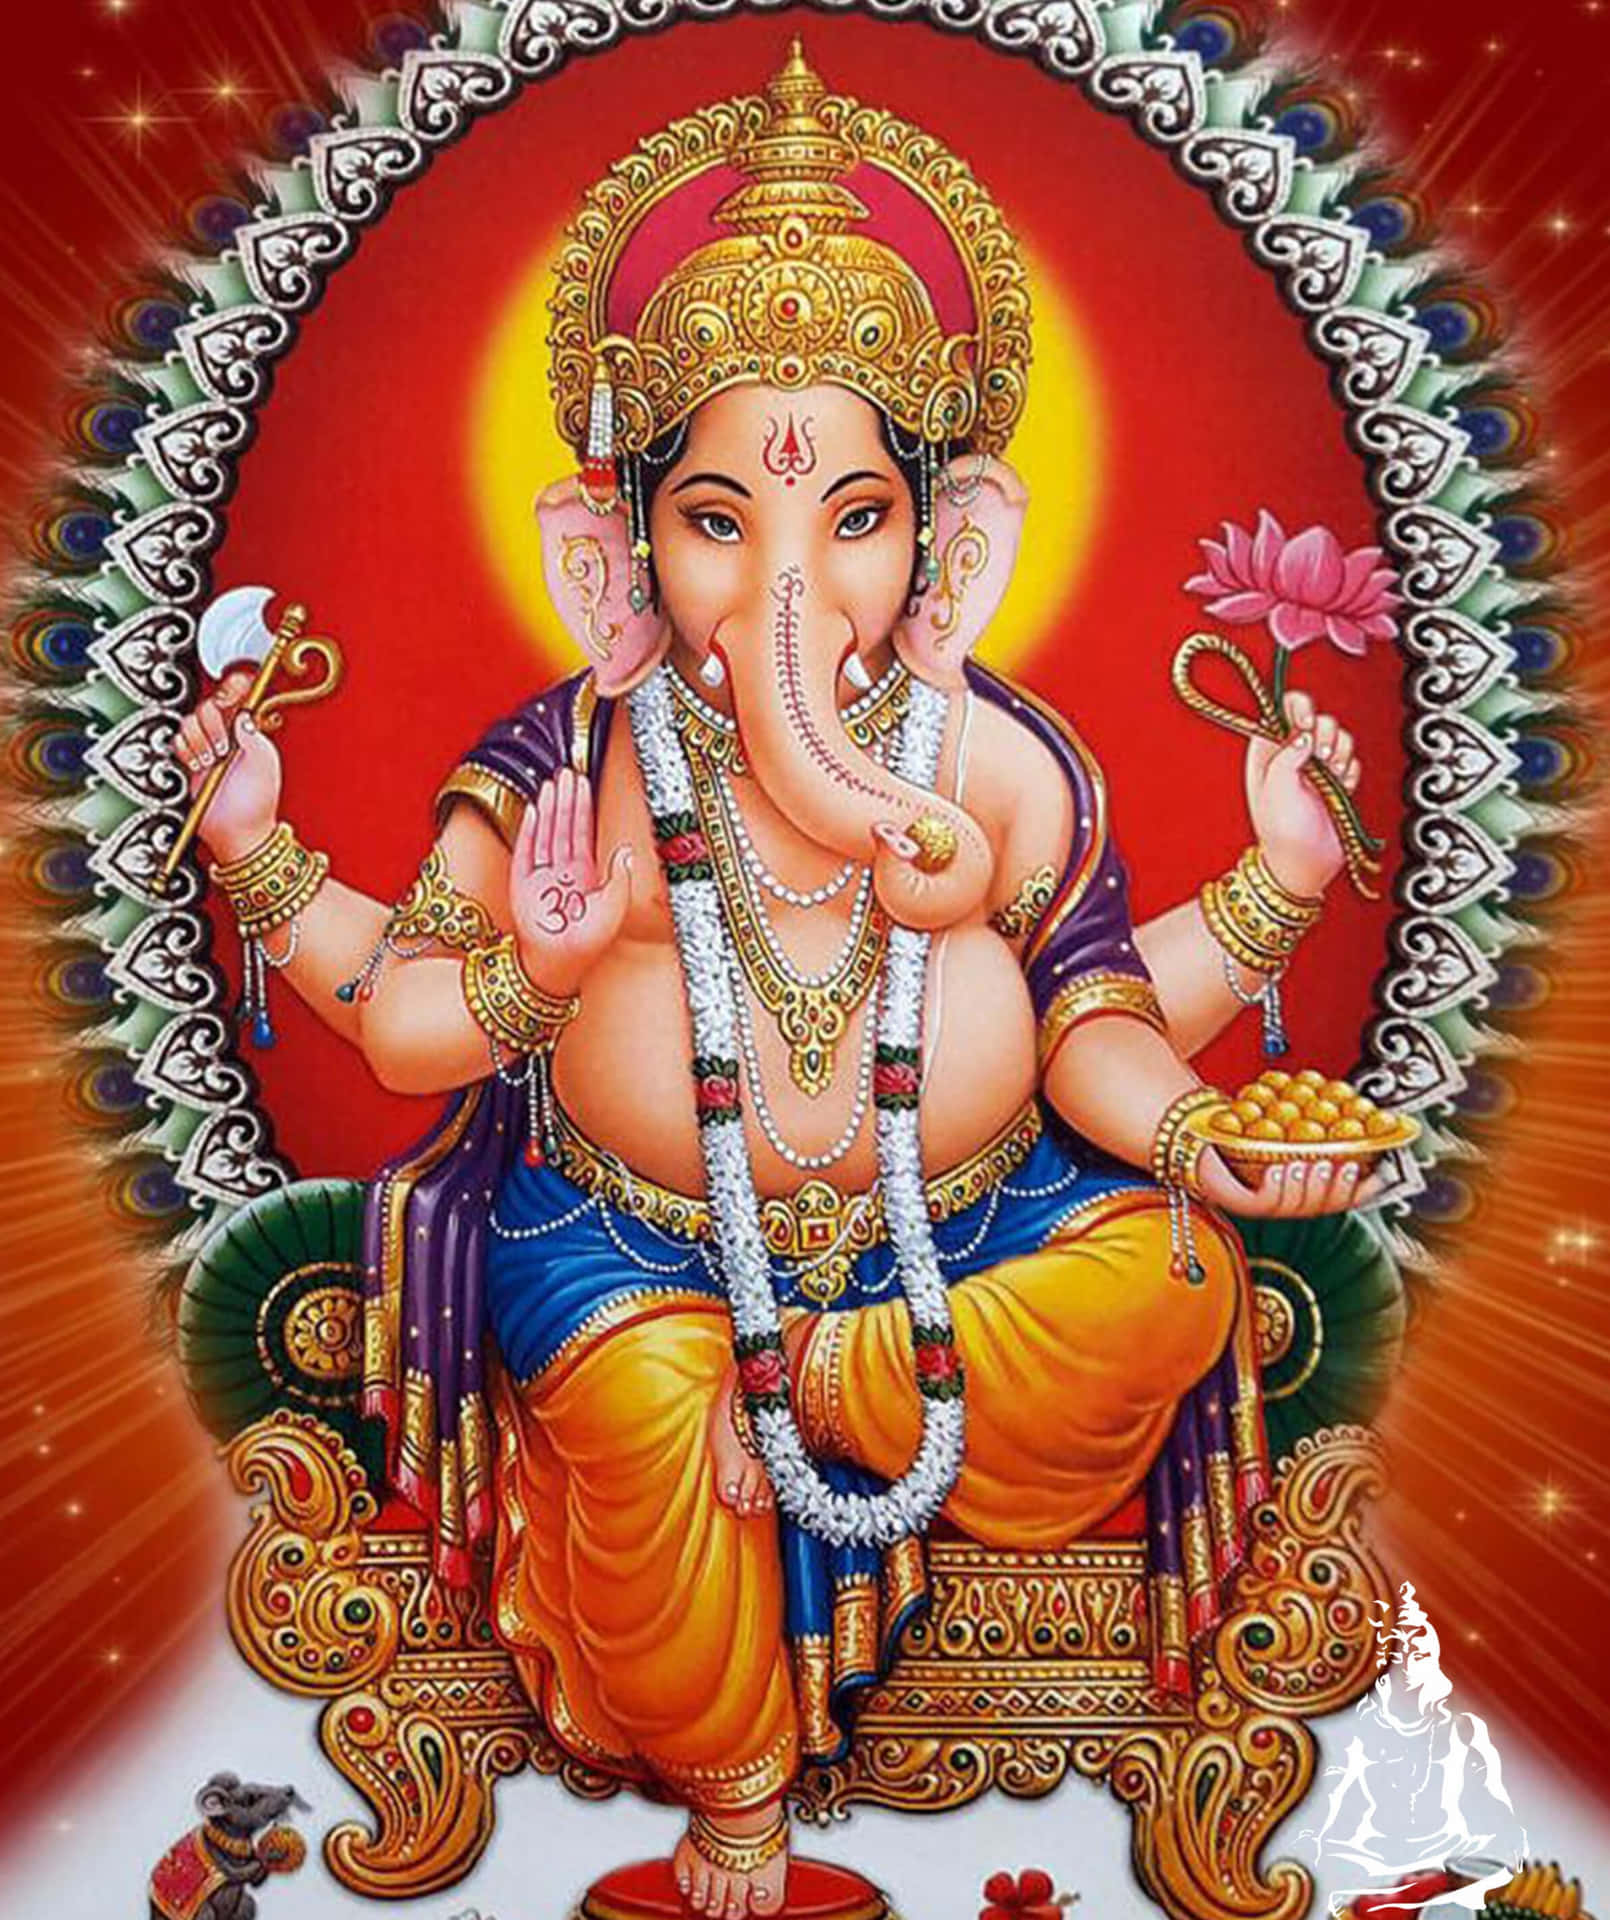 The lord of knowledge and prosperity, Lord Ganesha.